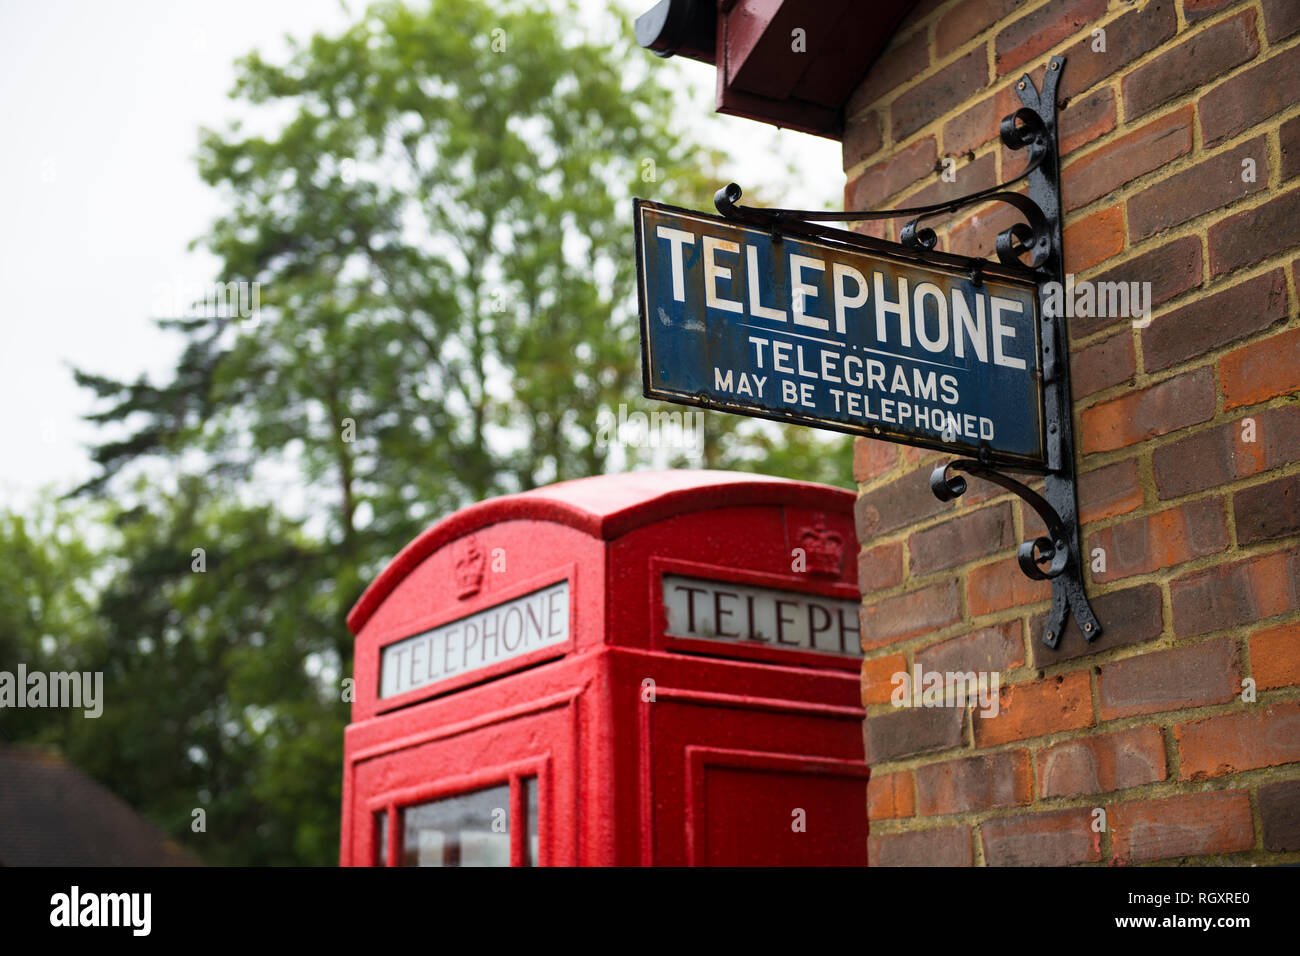 A quaint sign for a telephone and telegram on a wall, with a red telephone box behind it, at an old train station in Kent, UK. Stock Photo